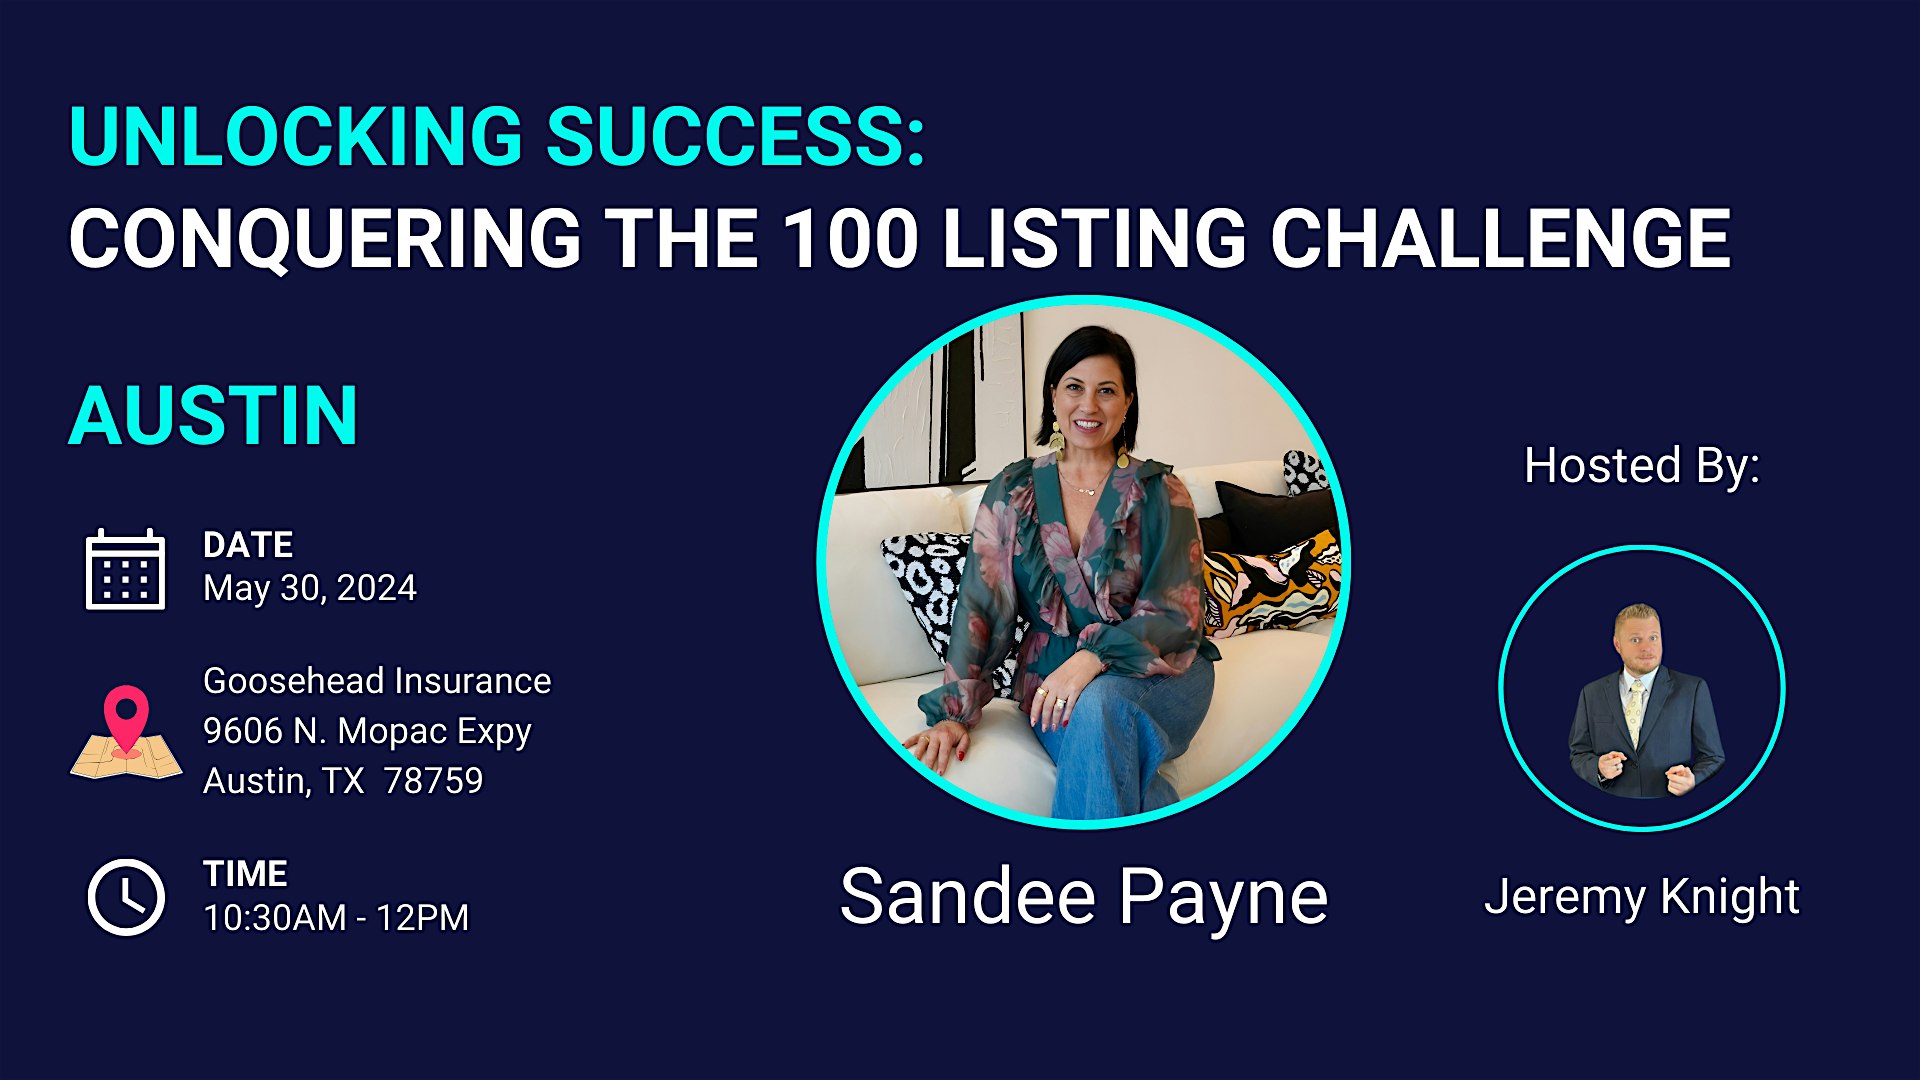 Unlocking Success: Conquering the 100 Listing Challenge